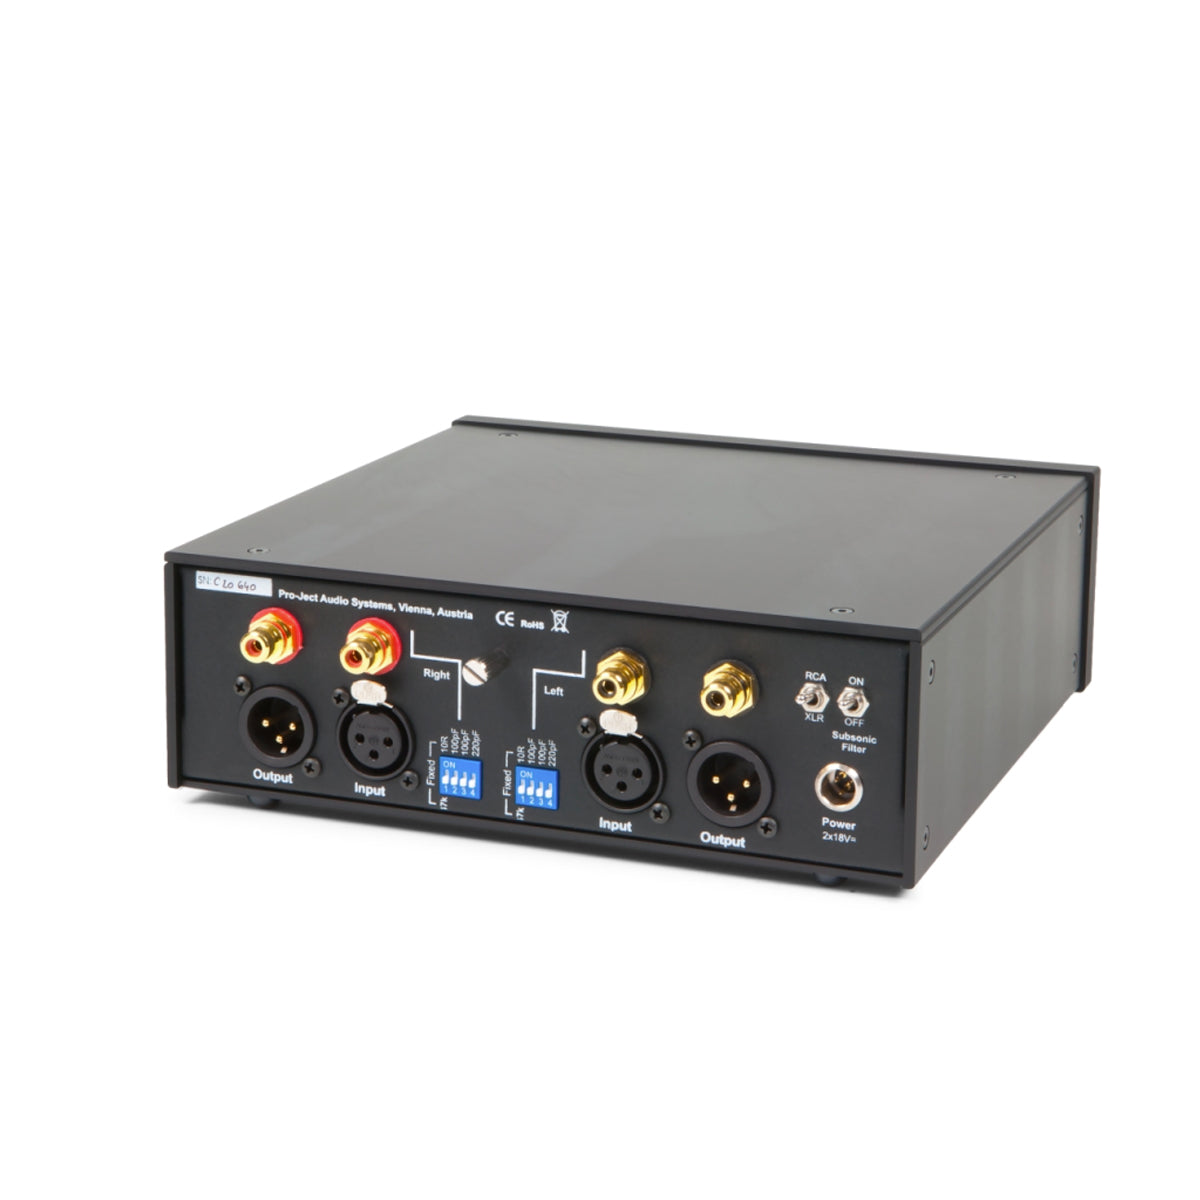 Pro-Ject Phono Box RS Phono Preamplifier - Black - The Audio Experts